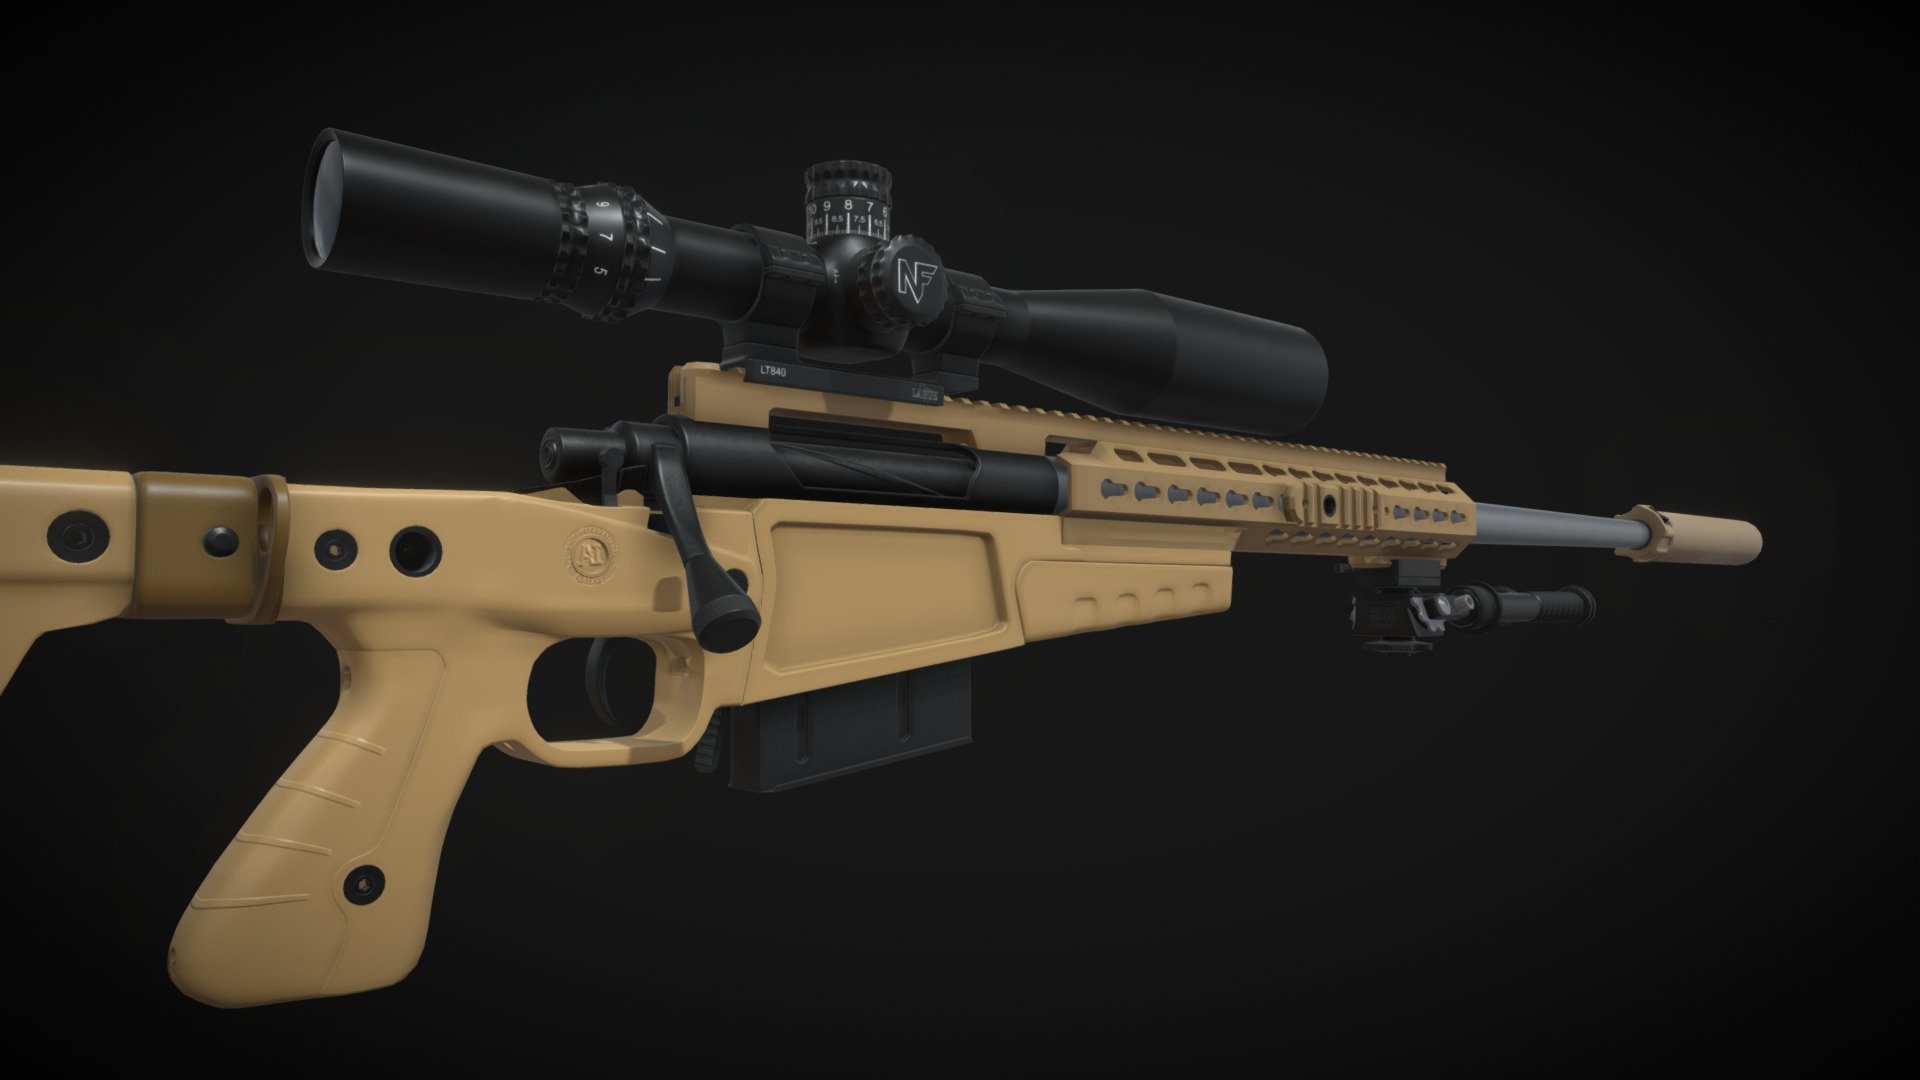 Highly detailed model of the action bolt MK13 mod-7 sniper rifle with some of its accessories such as the Nightforce Scope, LaRue Tactical Mout scope and Surefire suppressor. 
Software used: Autodesk Maya, Substance Painter and Adobe Illustrator 3d model